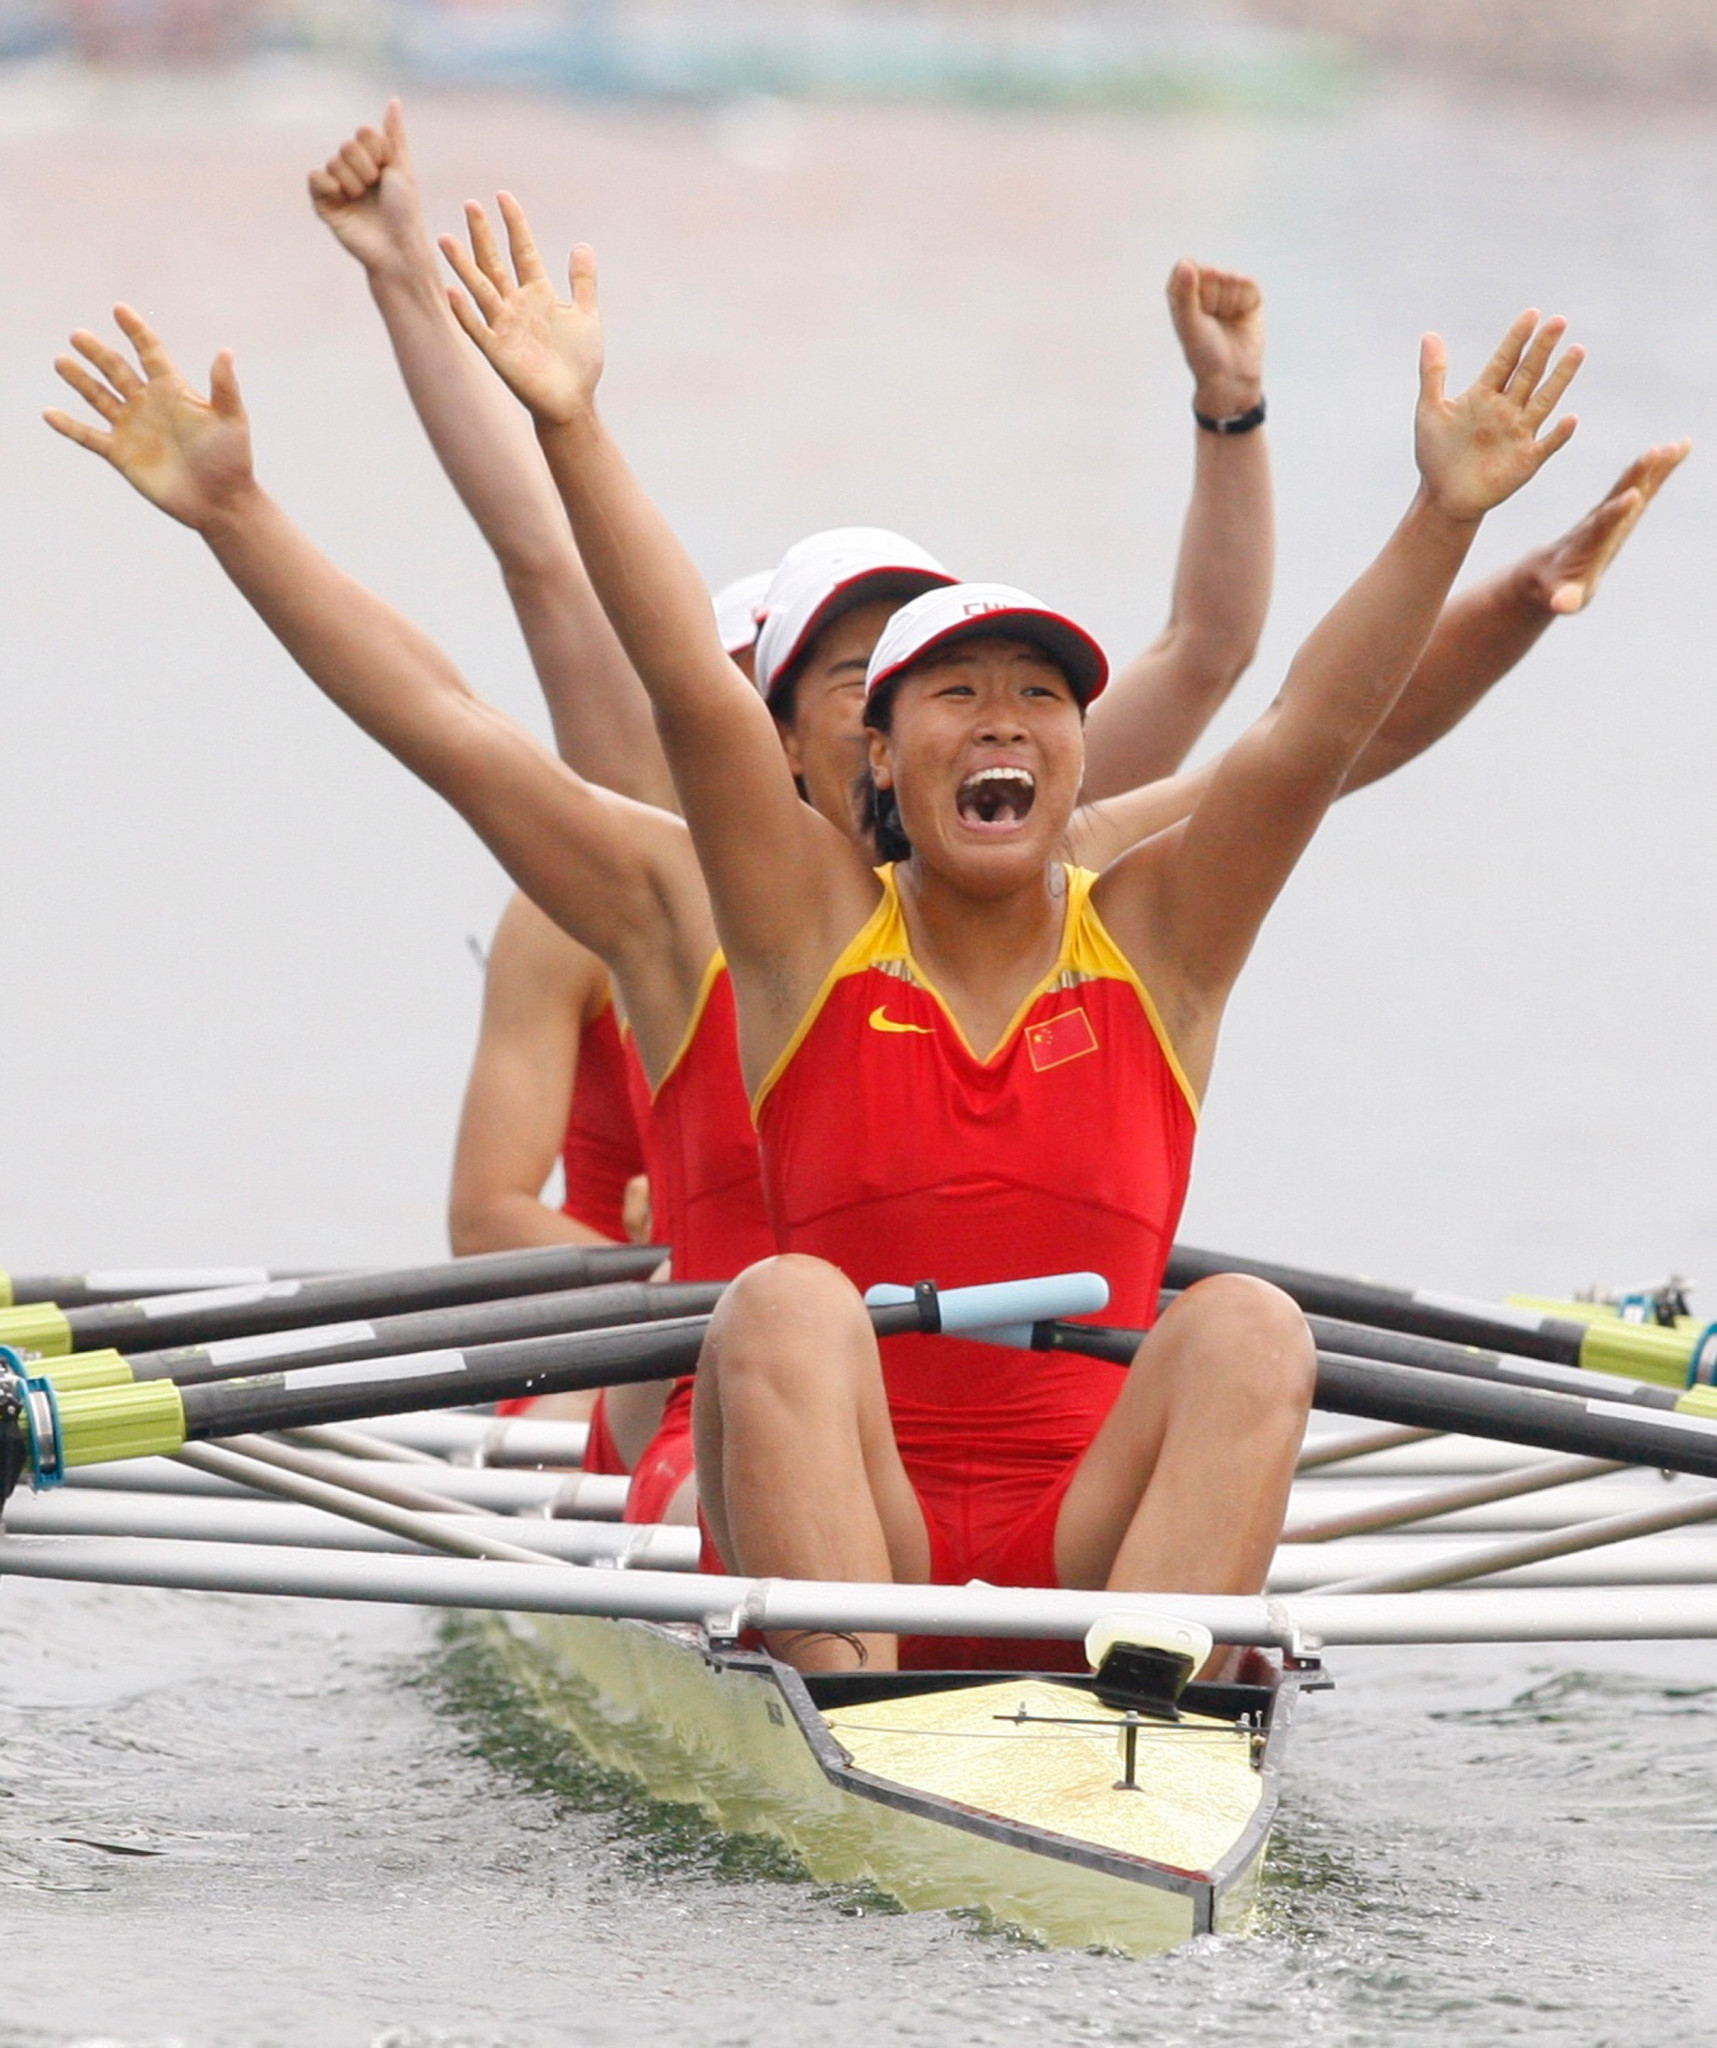 China's only Olympic rowing gold medal to date came in the women's quadruple sculls event at Beijing 2008 ©Getty Images